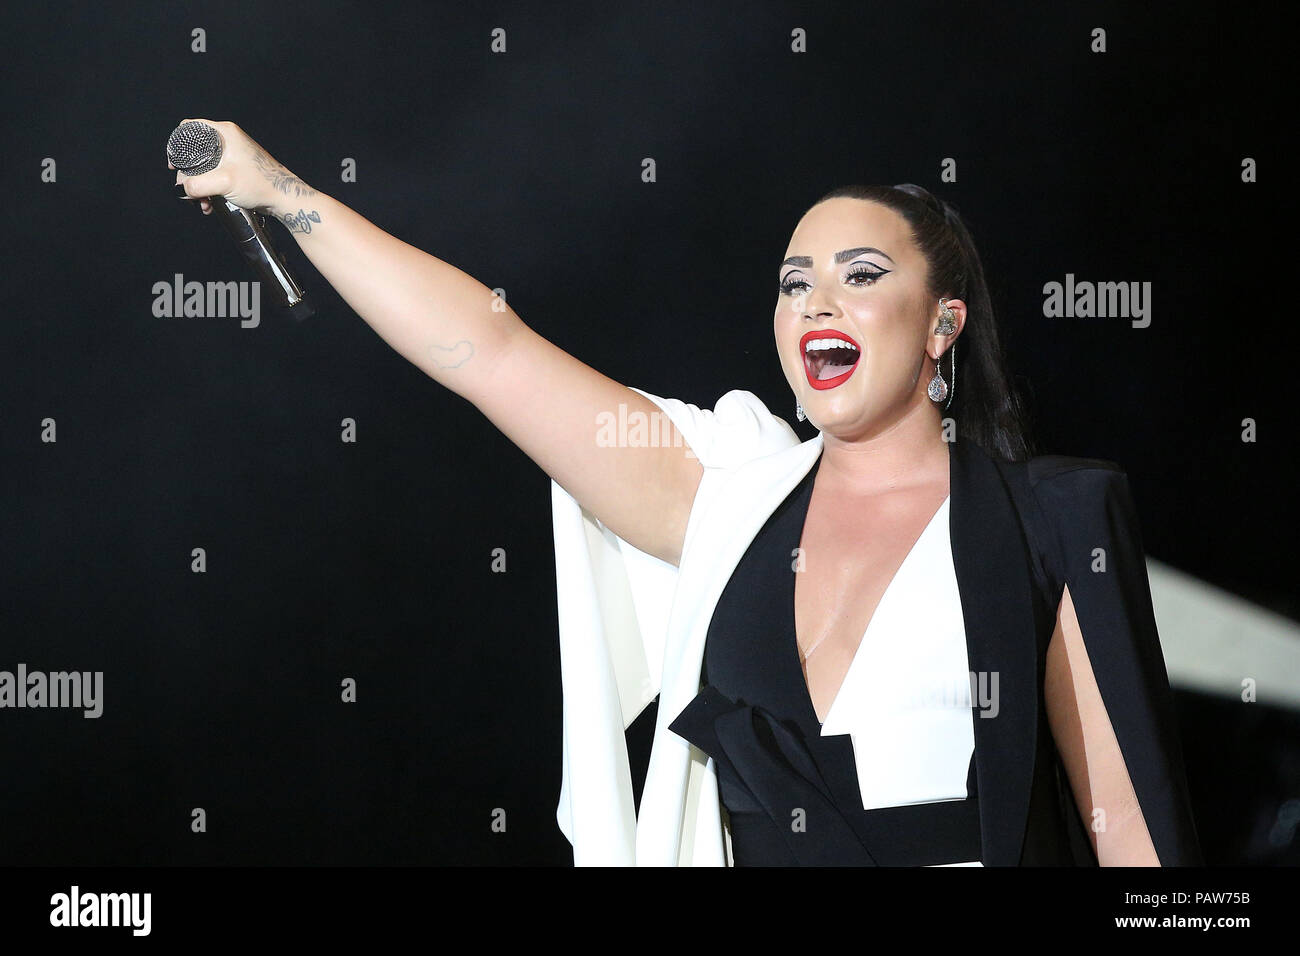 July 24, 2018 - FILE - Demi Lovato has been rushed to a hospital in Los Angeles after allegedly overdosing on heroin. A law enforcement source confirmed that the overdose occurred at Lovato's home and that she was found unconscious before being given Narcan and transported to the hospital. Lovato, 25, has been incredibly open about her struggles with alcohol and drugs, and earlier this year debuted her single 'Sober' in which she detailed her battles and path to recovery. PICTURED: June 24, 2018 - Lisbon, Portugal - US singer DEMI LOVATO performs at the Rock in Rio Lisboa 2018 music festival i Stock Photo